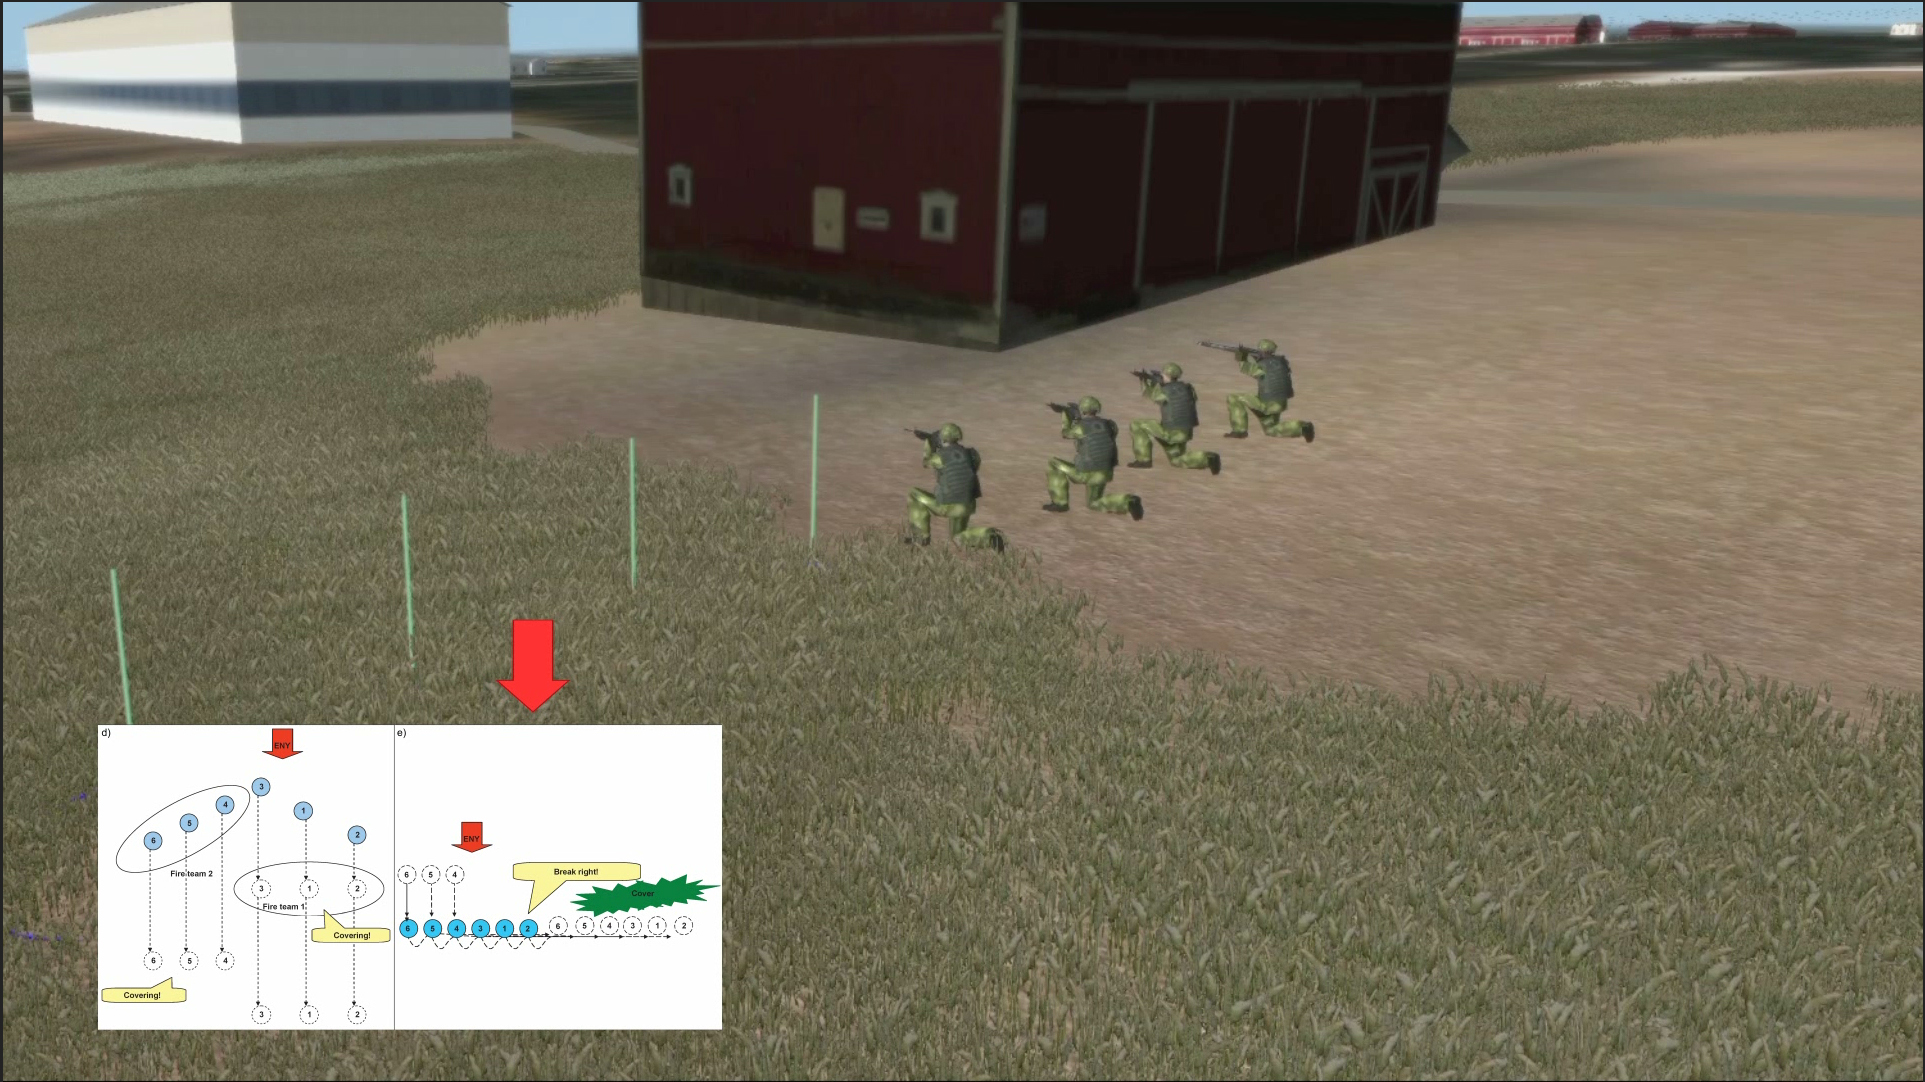 FFI developed AI behaviors for infantry that can model military tactics 